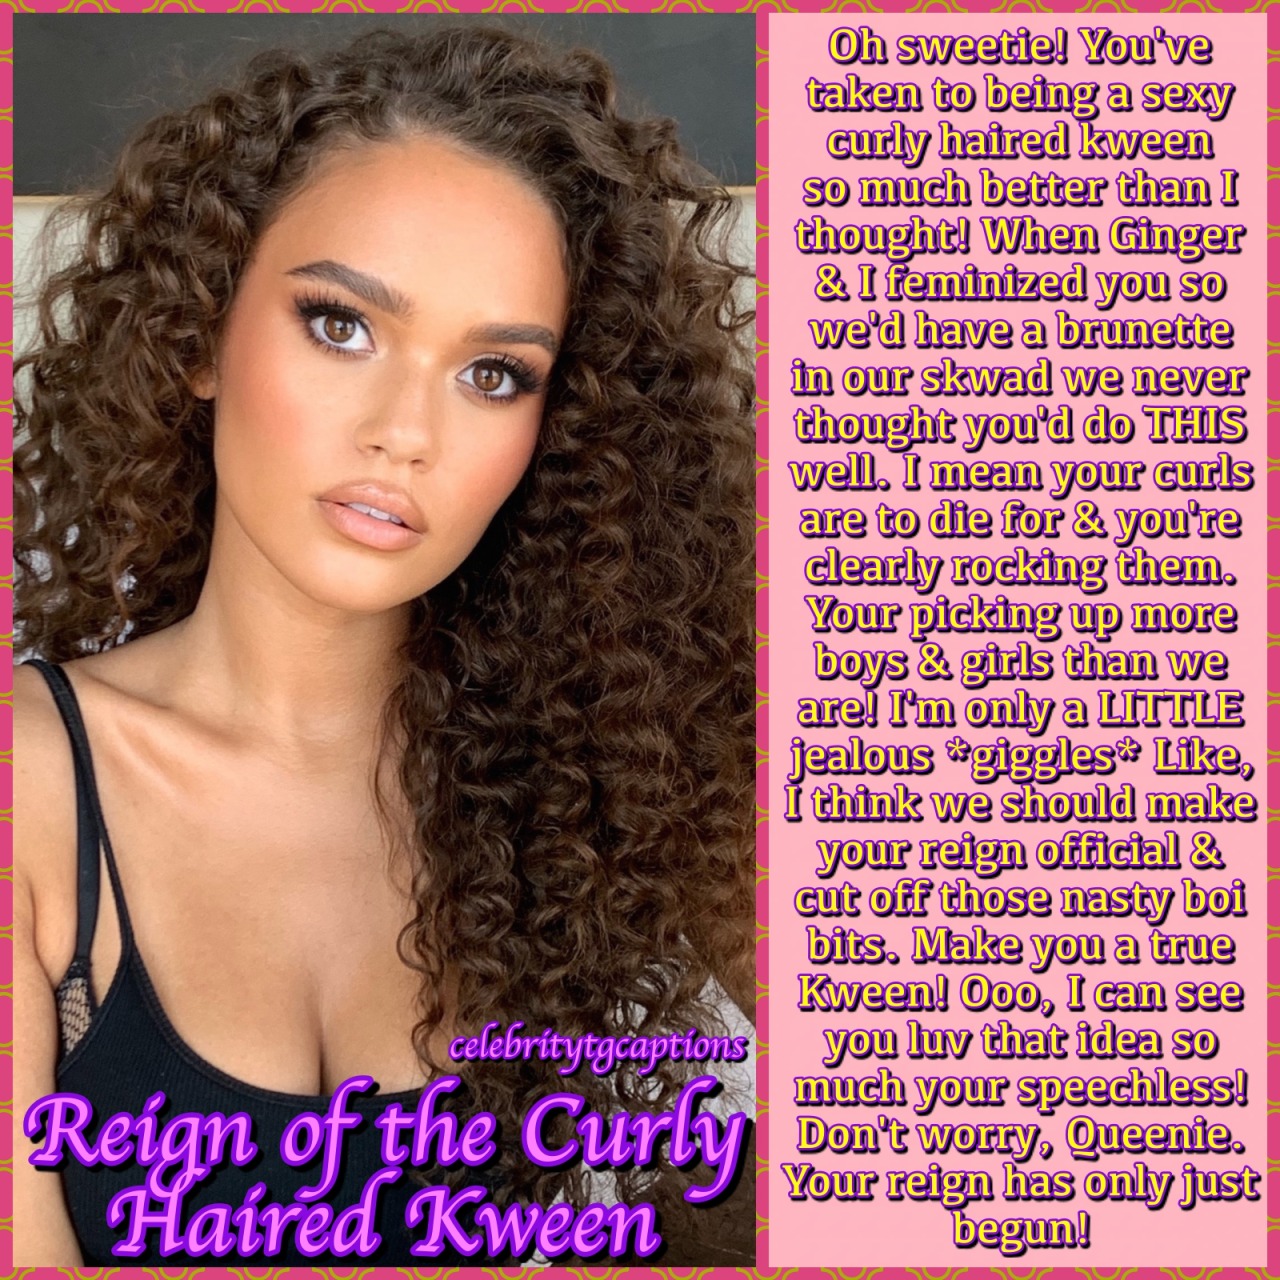 Celebrity TG Captions — Some requested a sequel to the Curly Haired Kween...